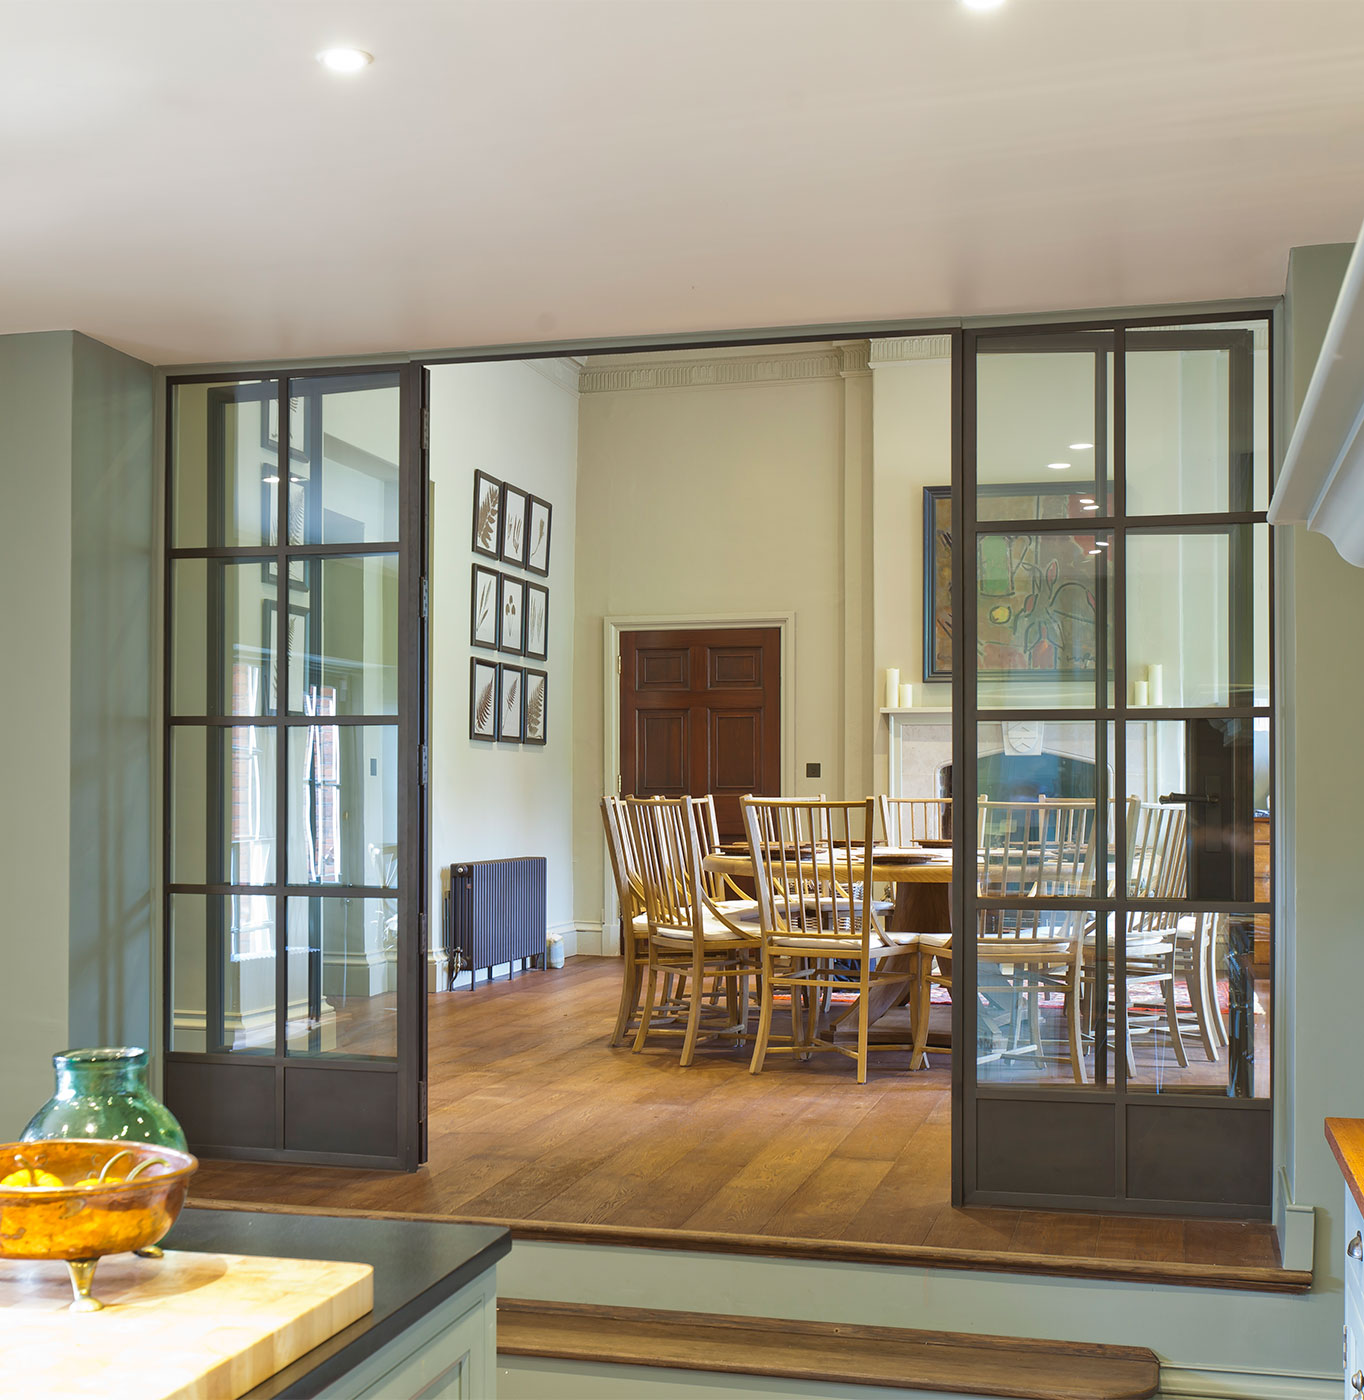 Glass room divider between kitchen and dining room